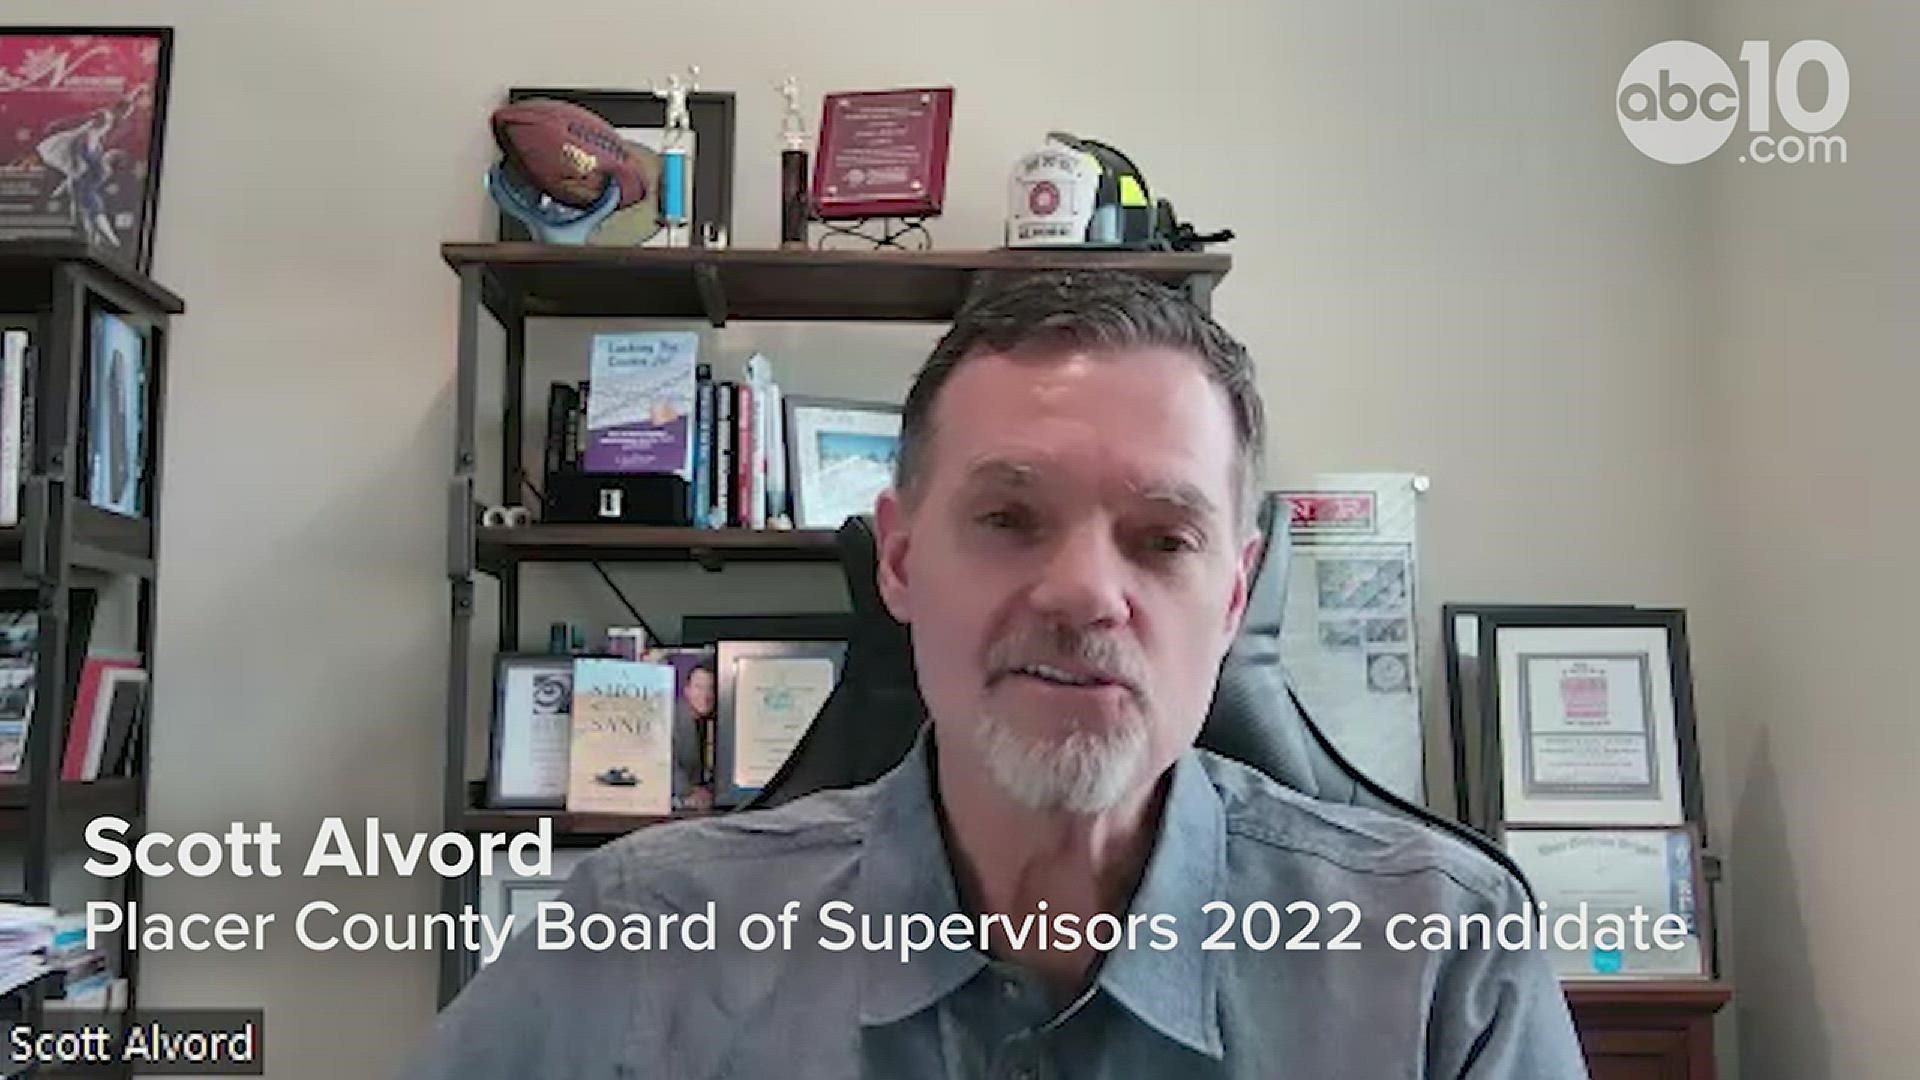 The Placer County Board of Supervisor's 2022 race is coming up, so we sat down with three candidates running and asked them about their platform and goals.